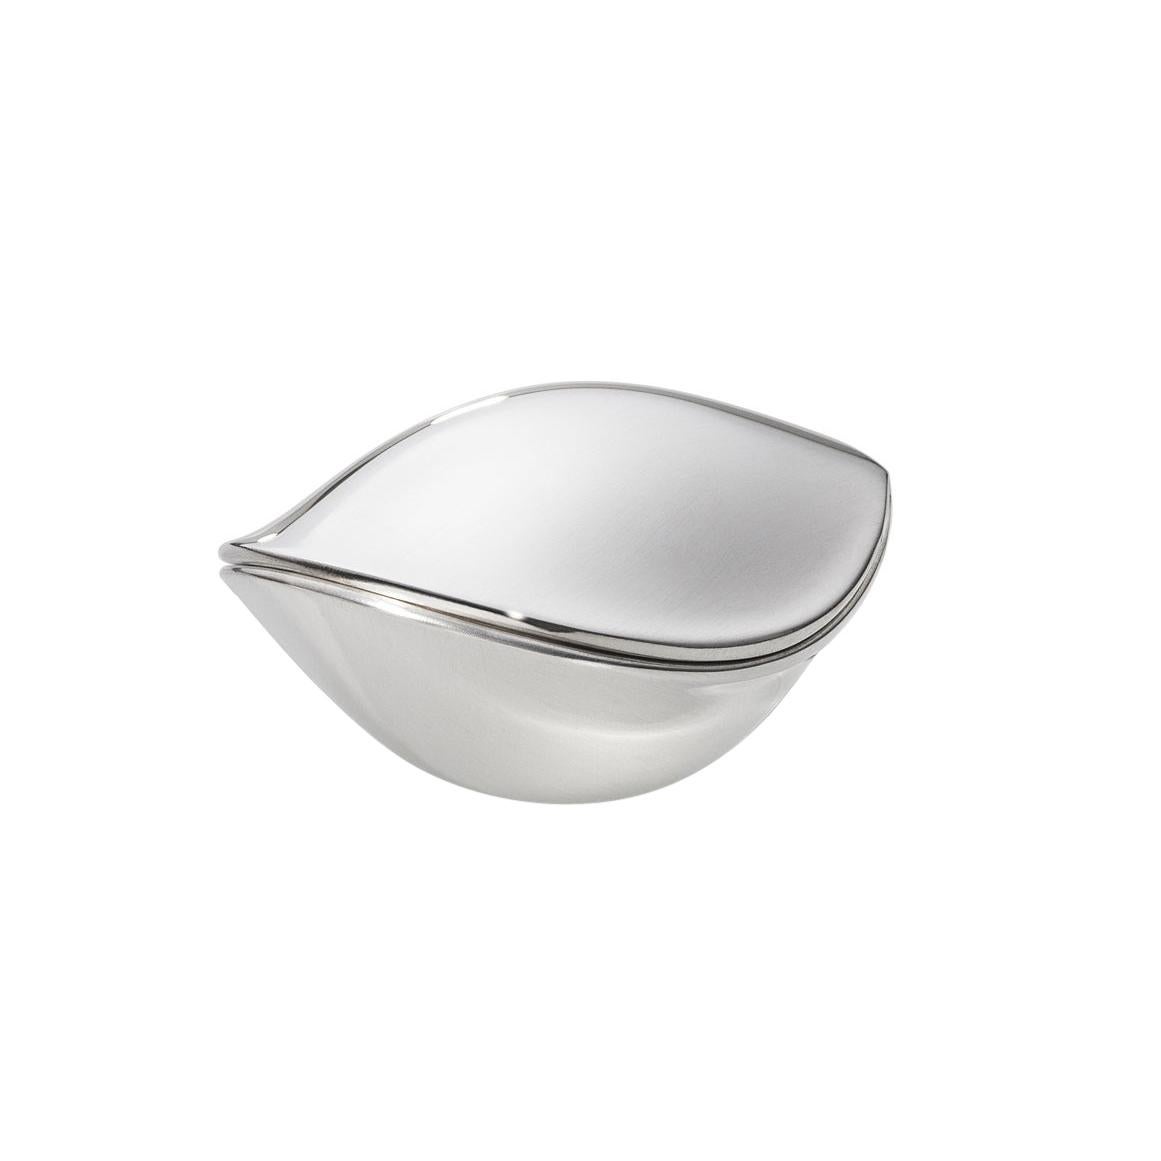 Henning Koppel 325 Handcrafted Sterling Silver Pill Box for Georg Jensen For Sale